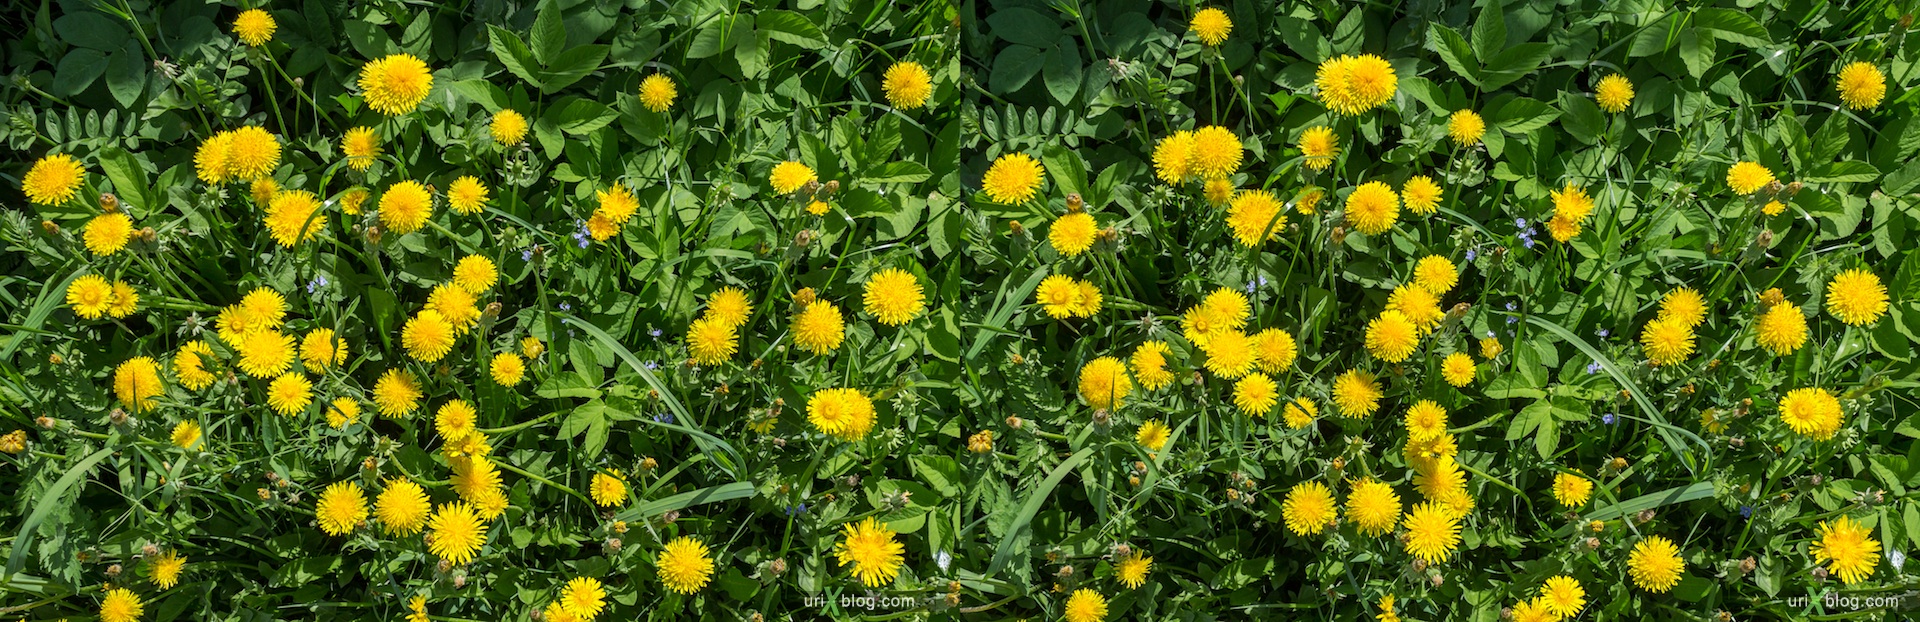 2013, dandelion, flower, grass, park, field, Moscow, Russia, spring, 3D, stereo pair, cross-eyed, crossview, cross view stereo pair, stereoscopic